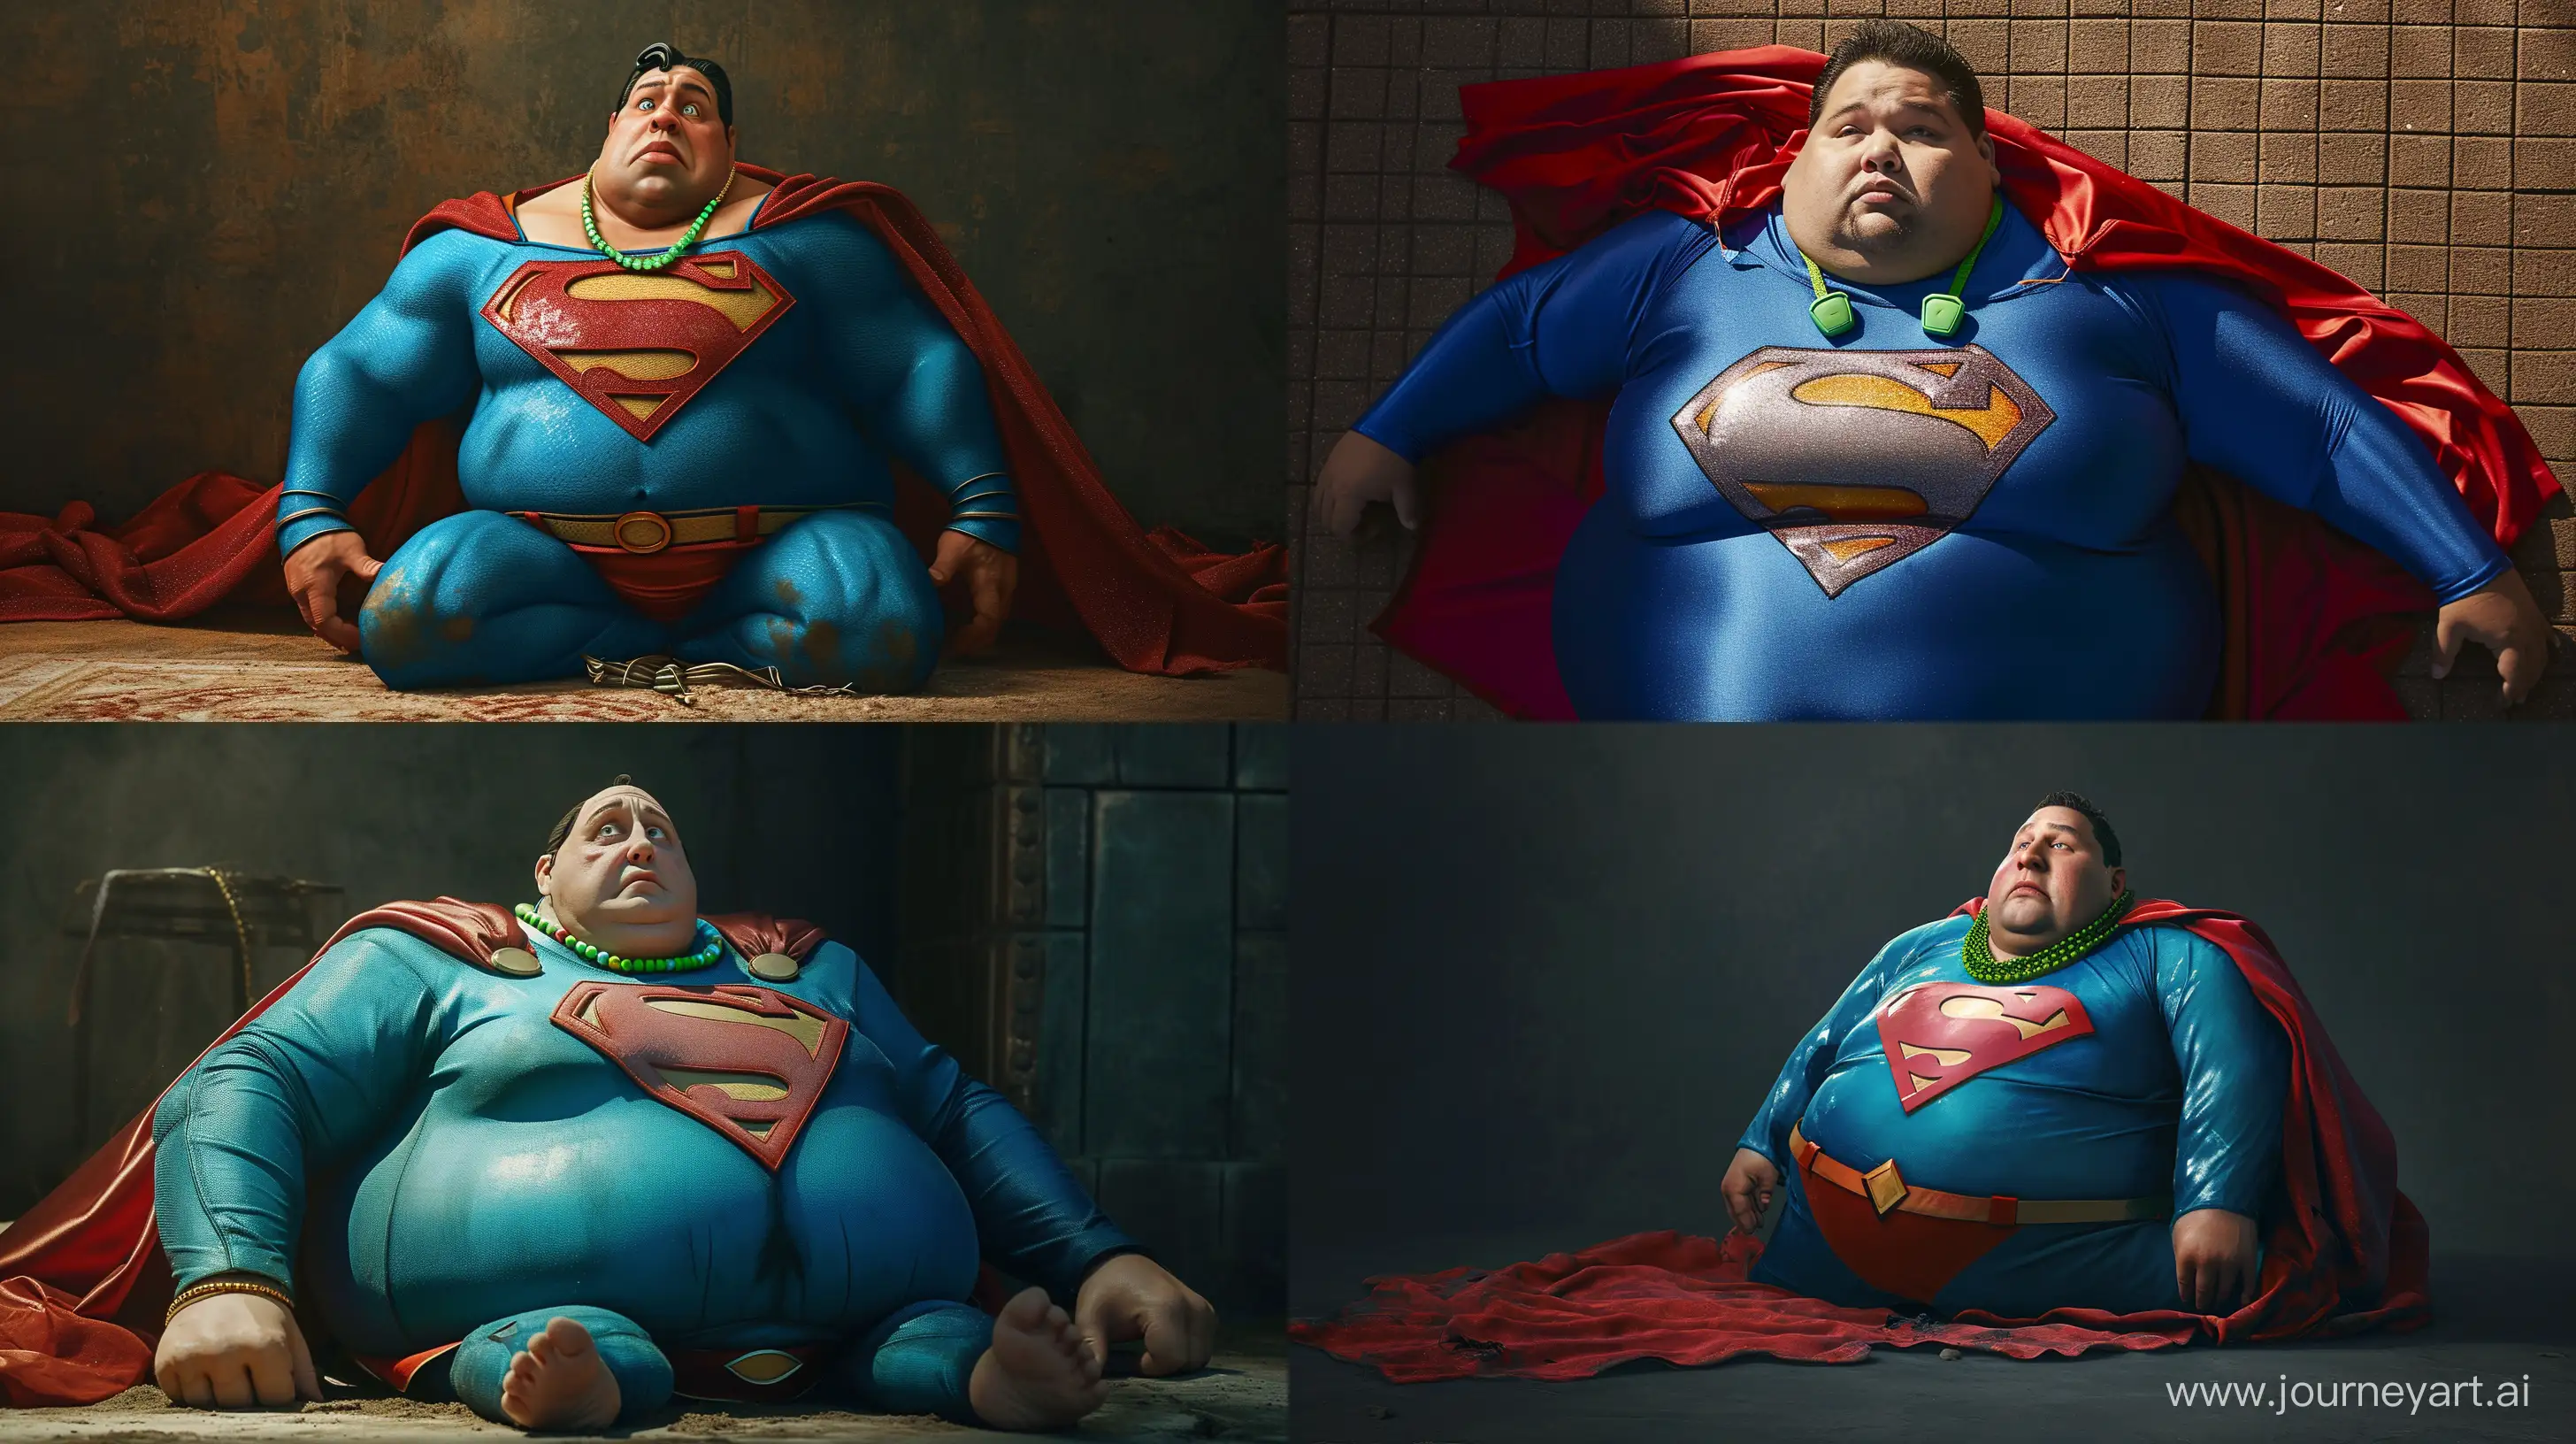 Cheerful-Superman-Relaxing-in-Bright-Blue-Costume-with-Red-Cape